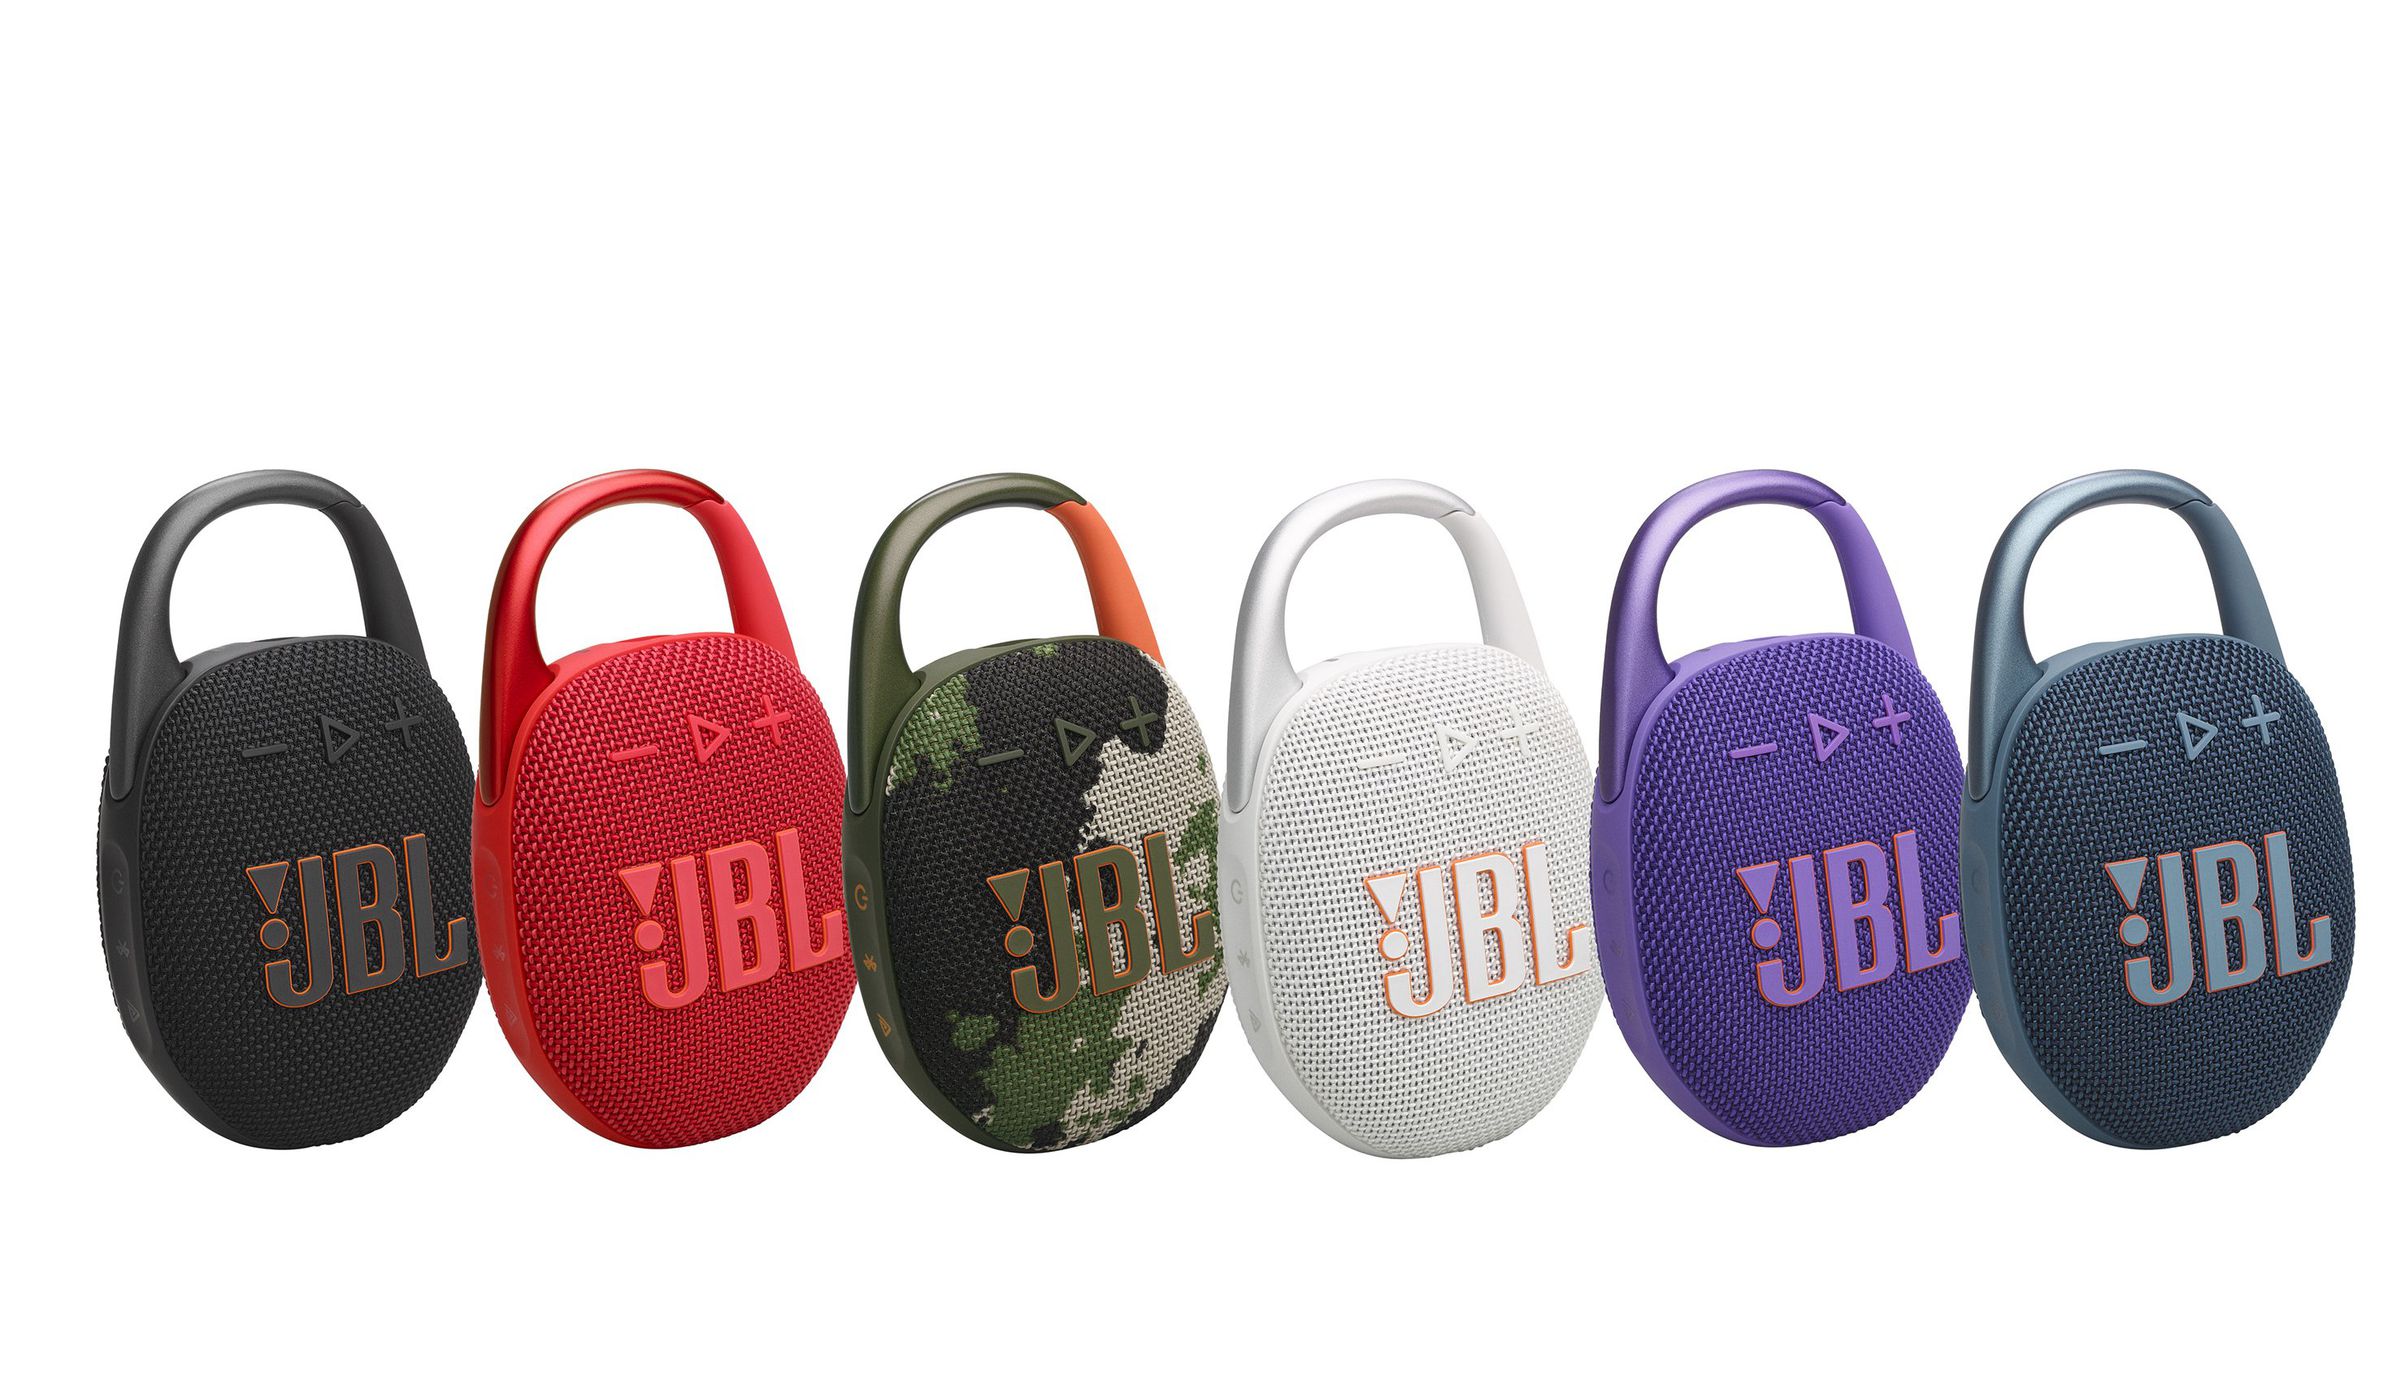 Six colors of the same portable speaker